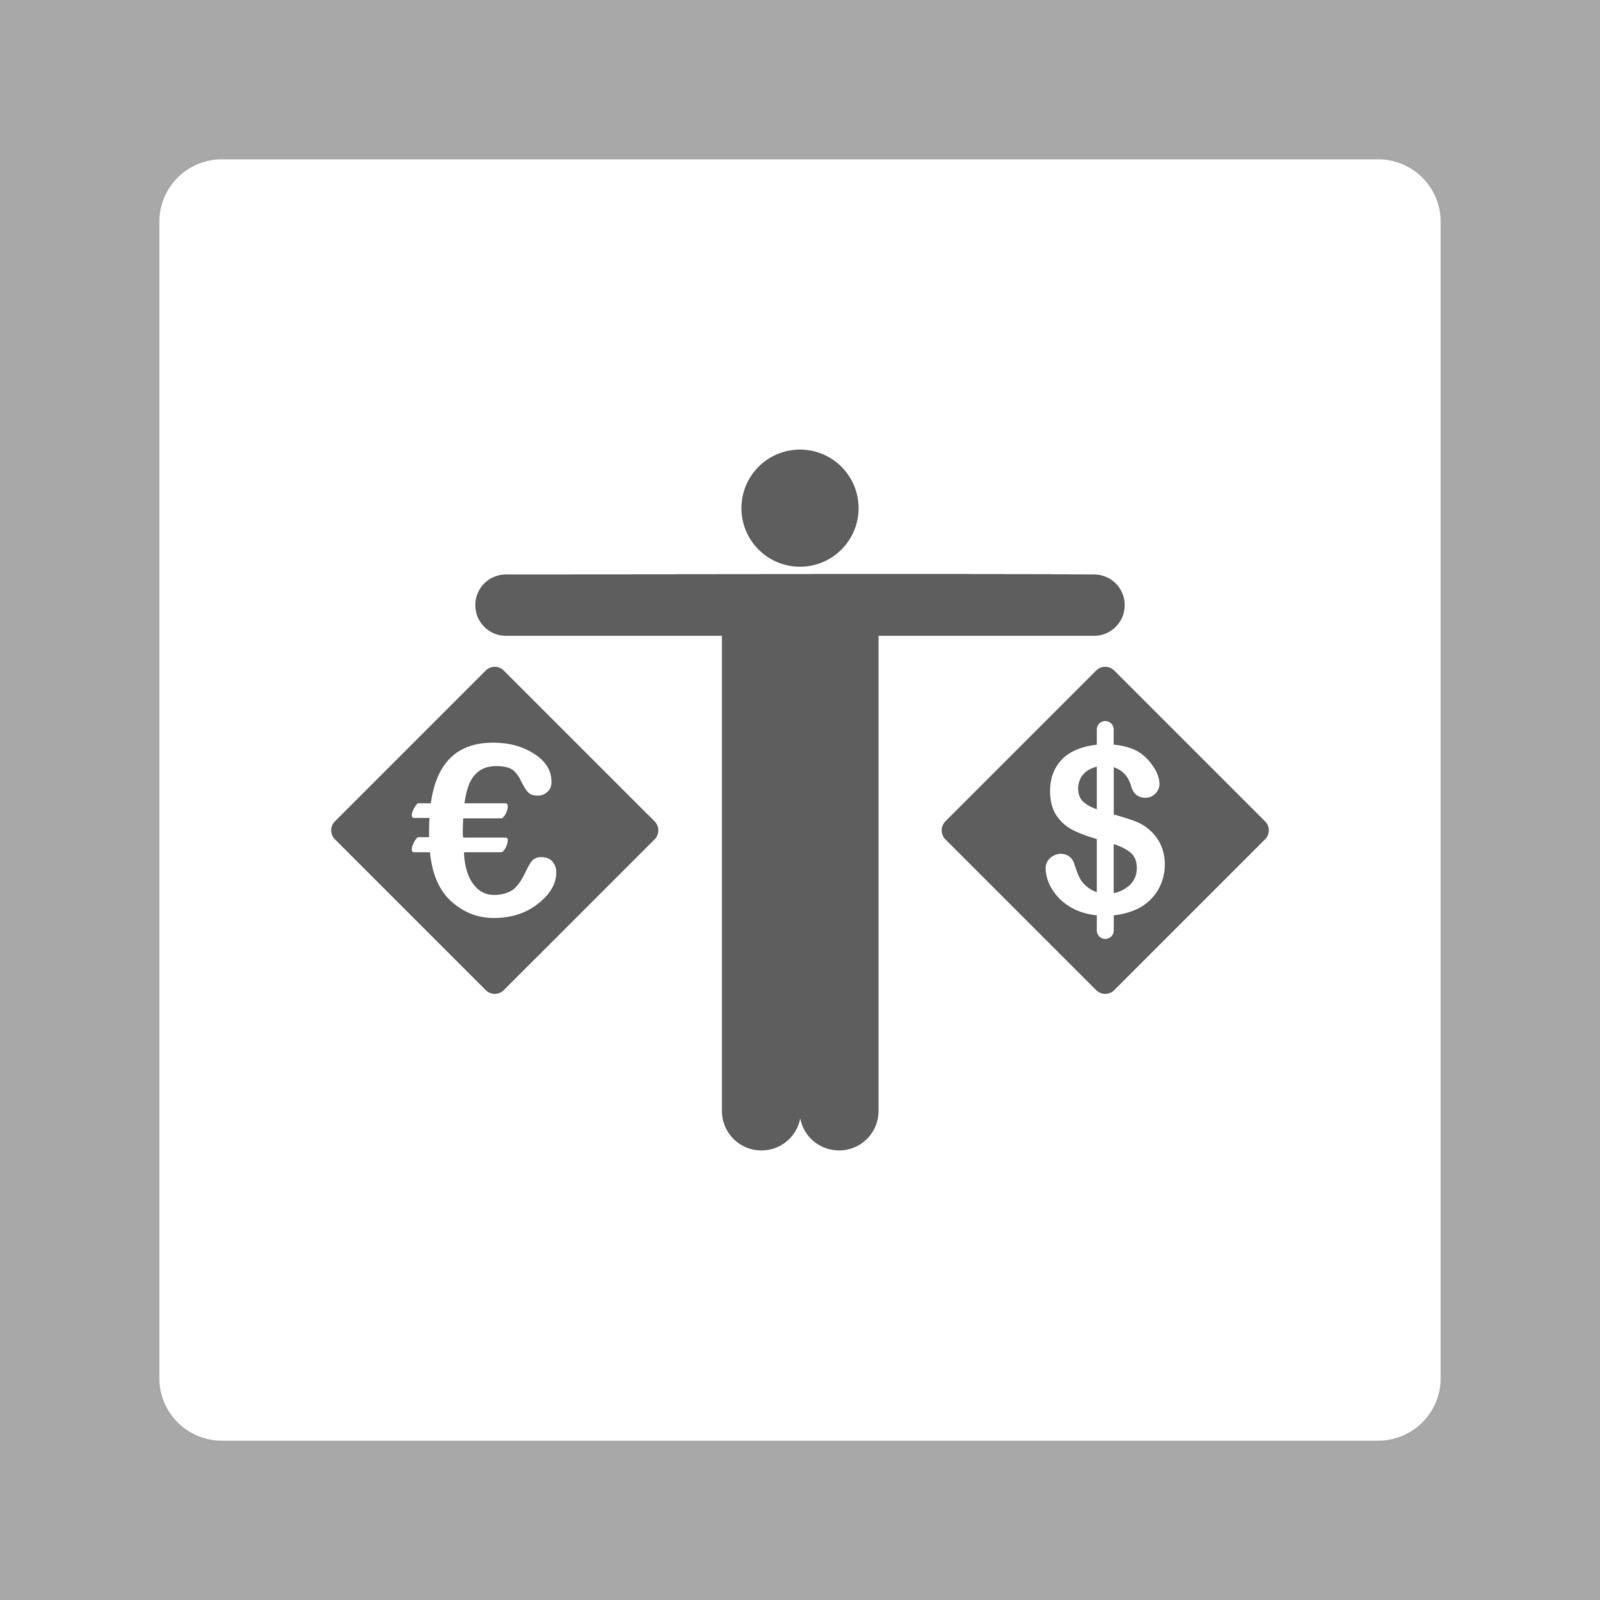 Currency compare icon. Vector style is dark gray and white colors, flat rounded square button on a silver background.